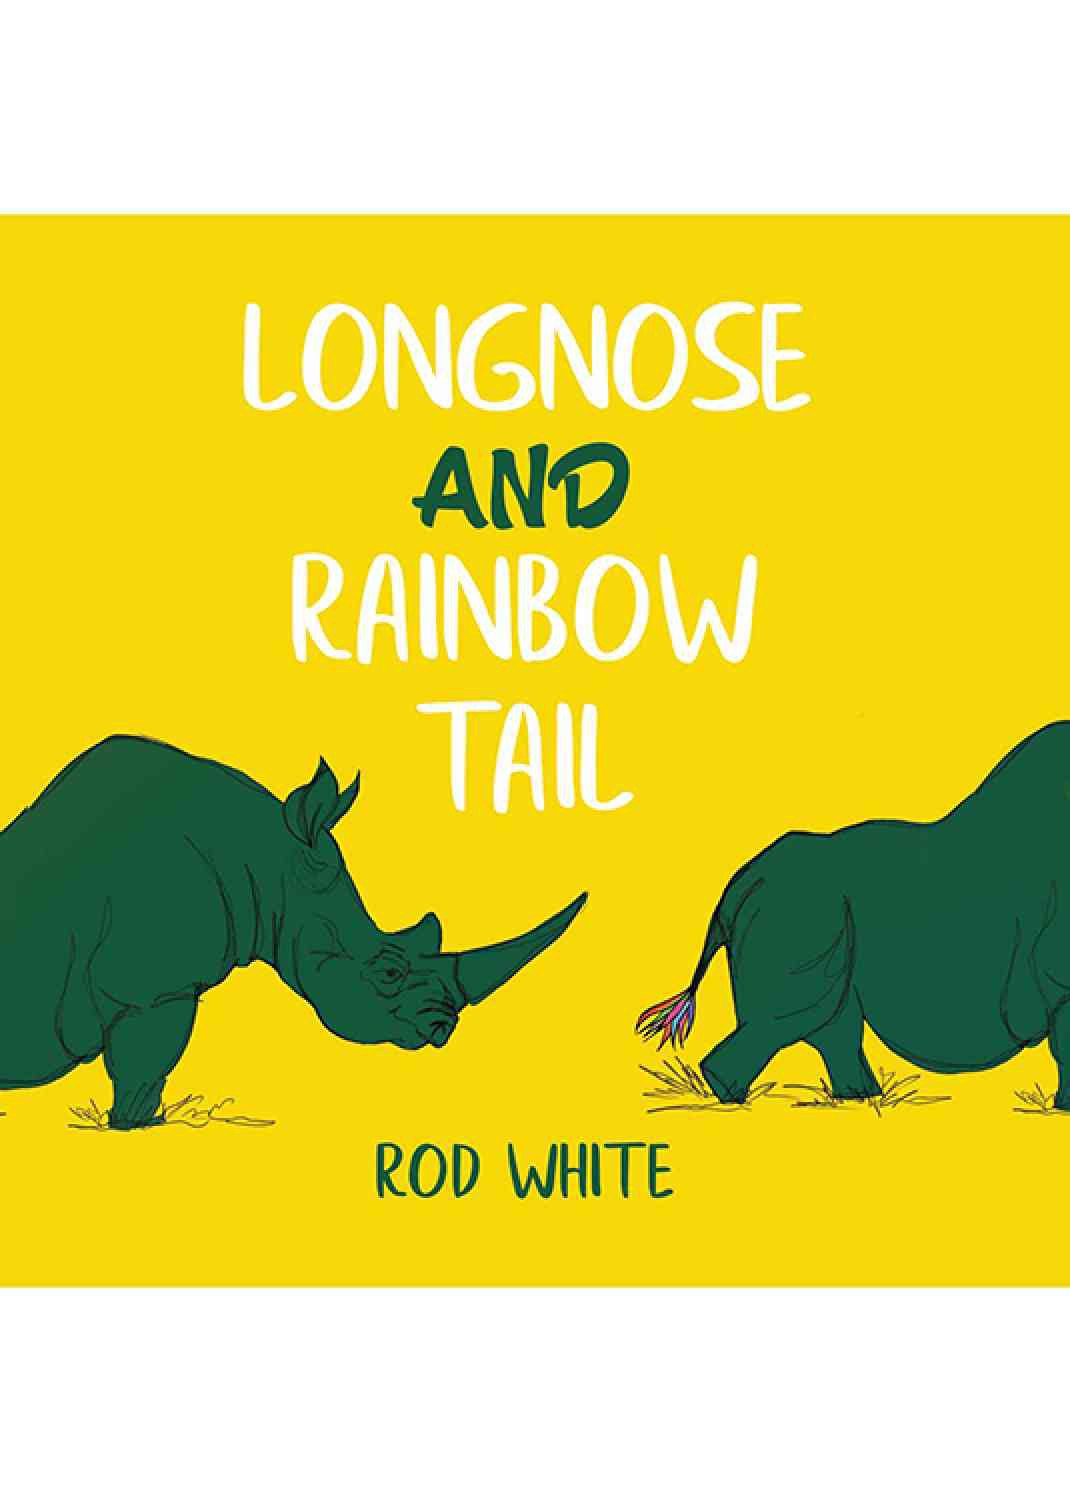 Longnose and Rainbow Tail Reviewed by Simon Jones, CEO and Founder of Helping Rhinos